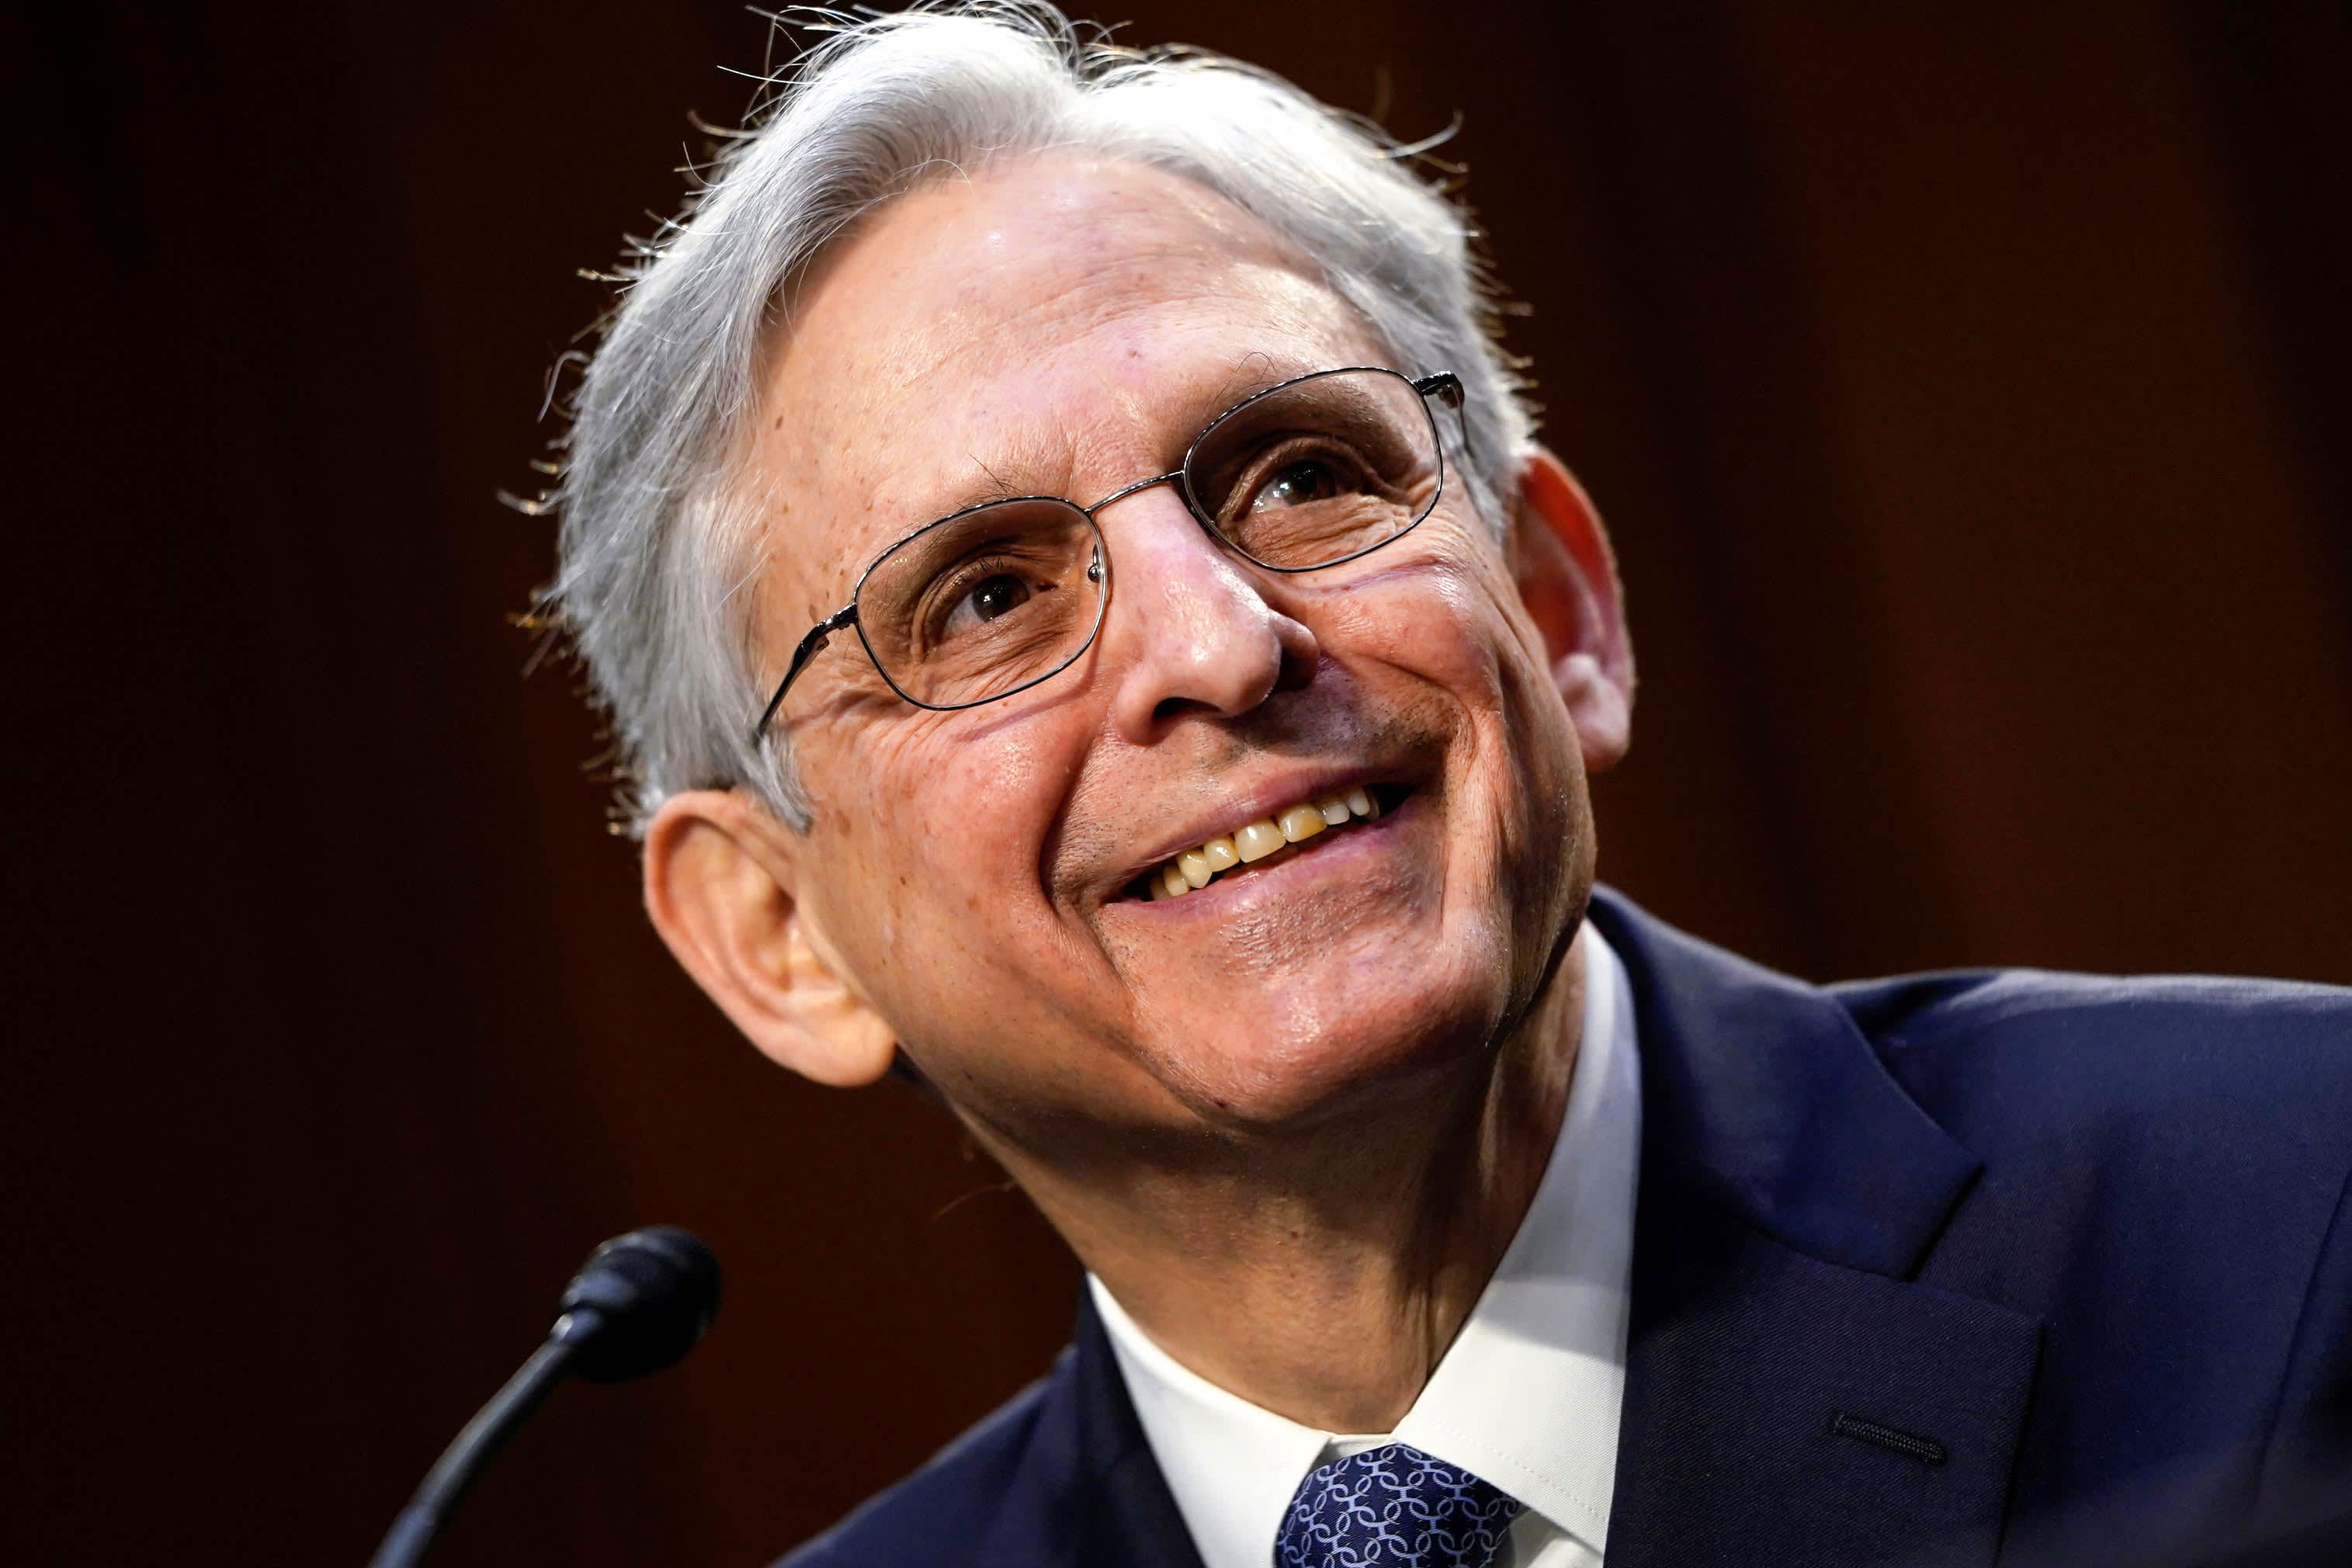 Merrick Garland has been confirmed by the Senate as US Attorney General.